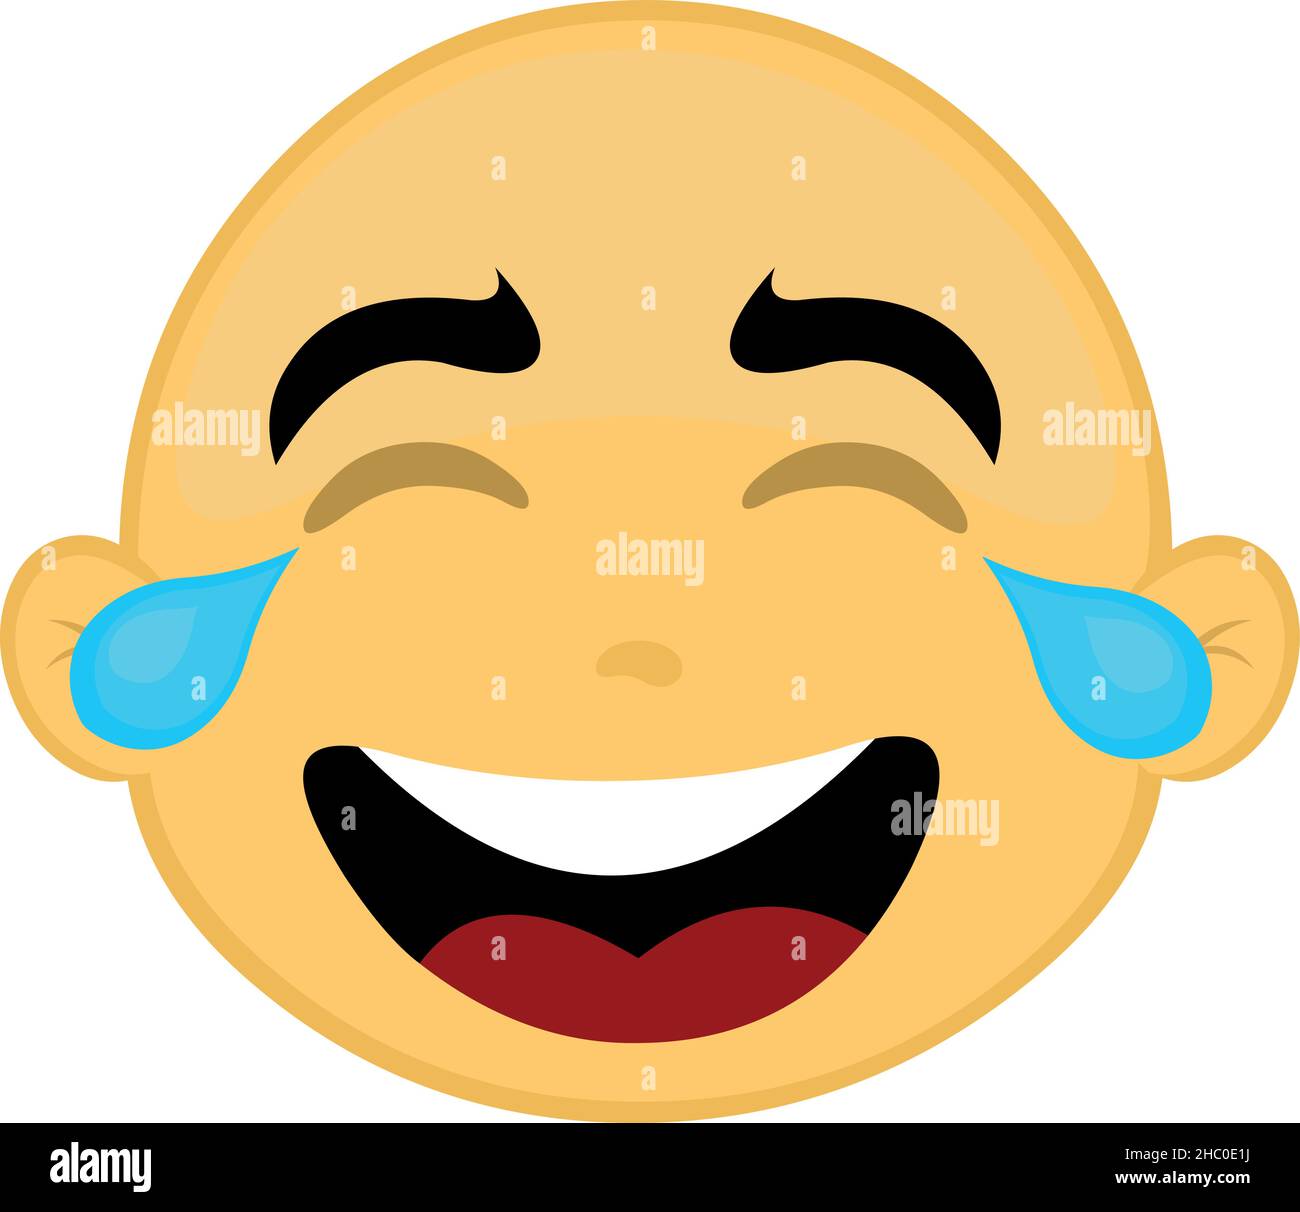 Vector illustration of the face of a bald and yellow cartoon character, with tears of joy Stock Vector